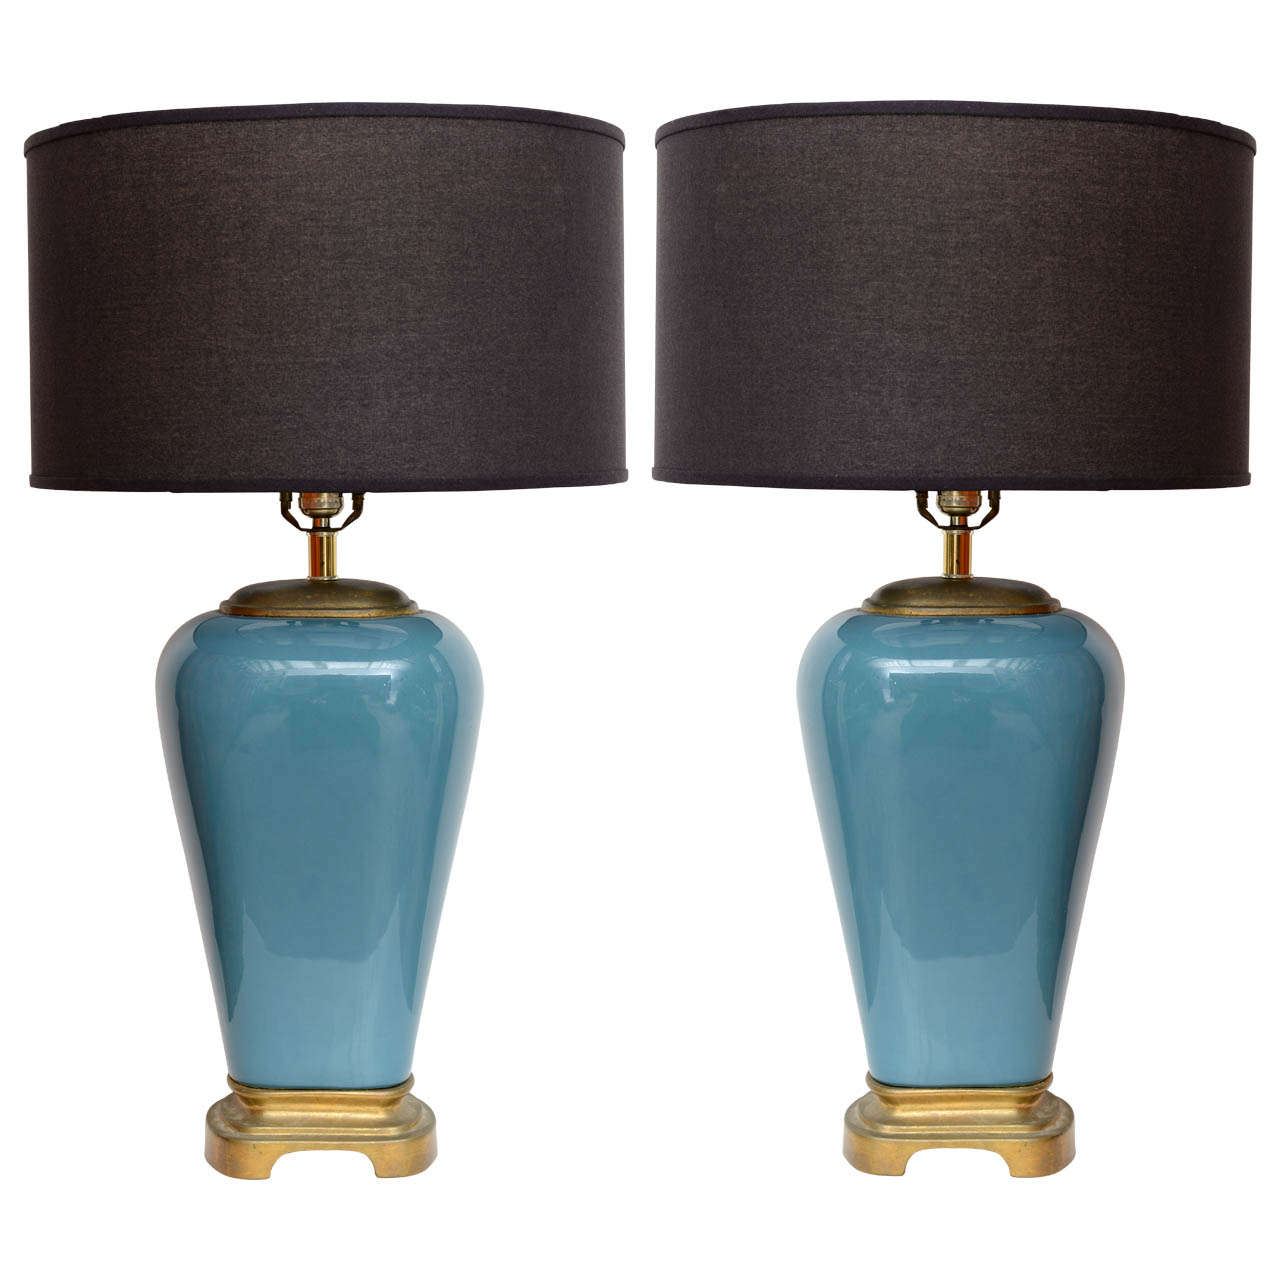 Hollywood Regency Turquoise Ceramic Lamps